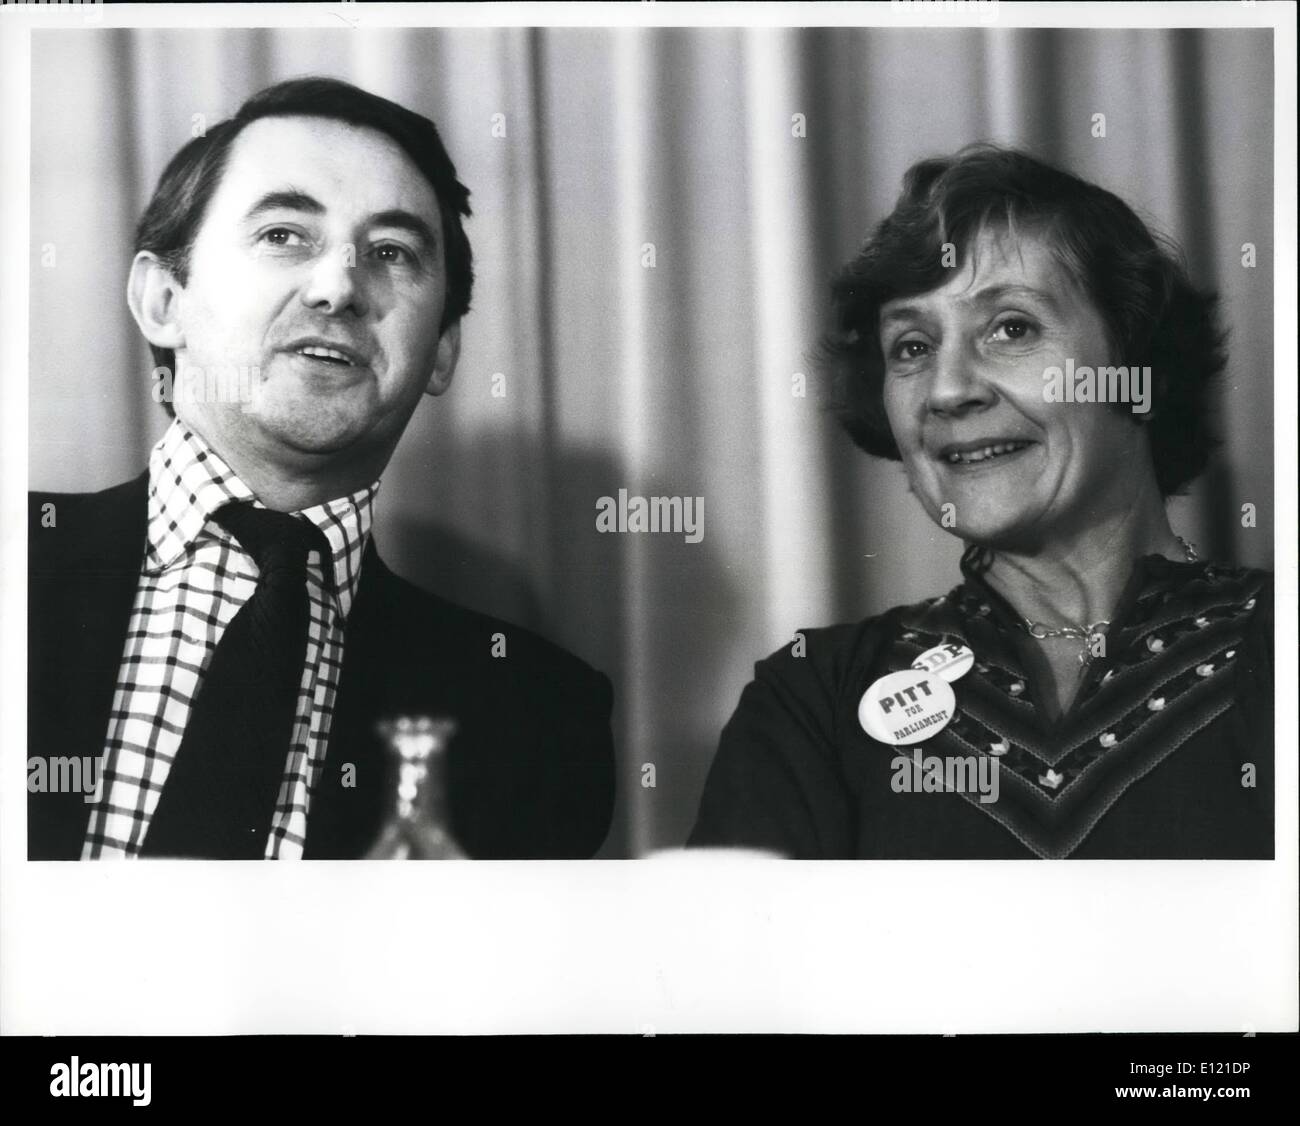 Oct. 10, 1981 - Croydon By-Election: David Steel and Shirley Williams photographed at Bill Pitt's election meeting in Croydon last night. The Croydon by-election takes place tomorrow, Thursday. Stock Photo